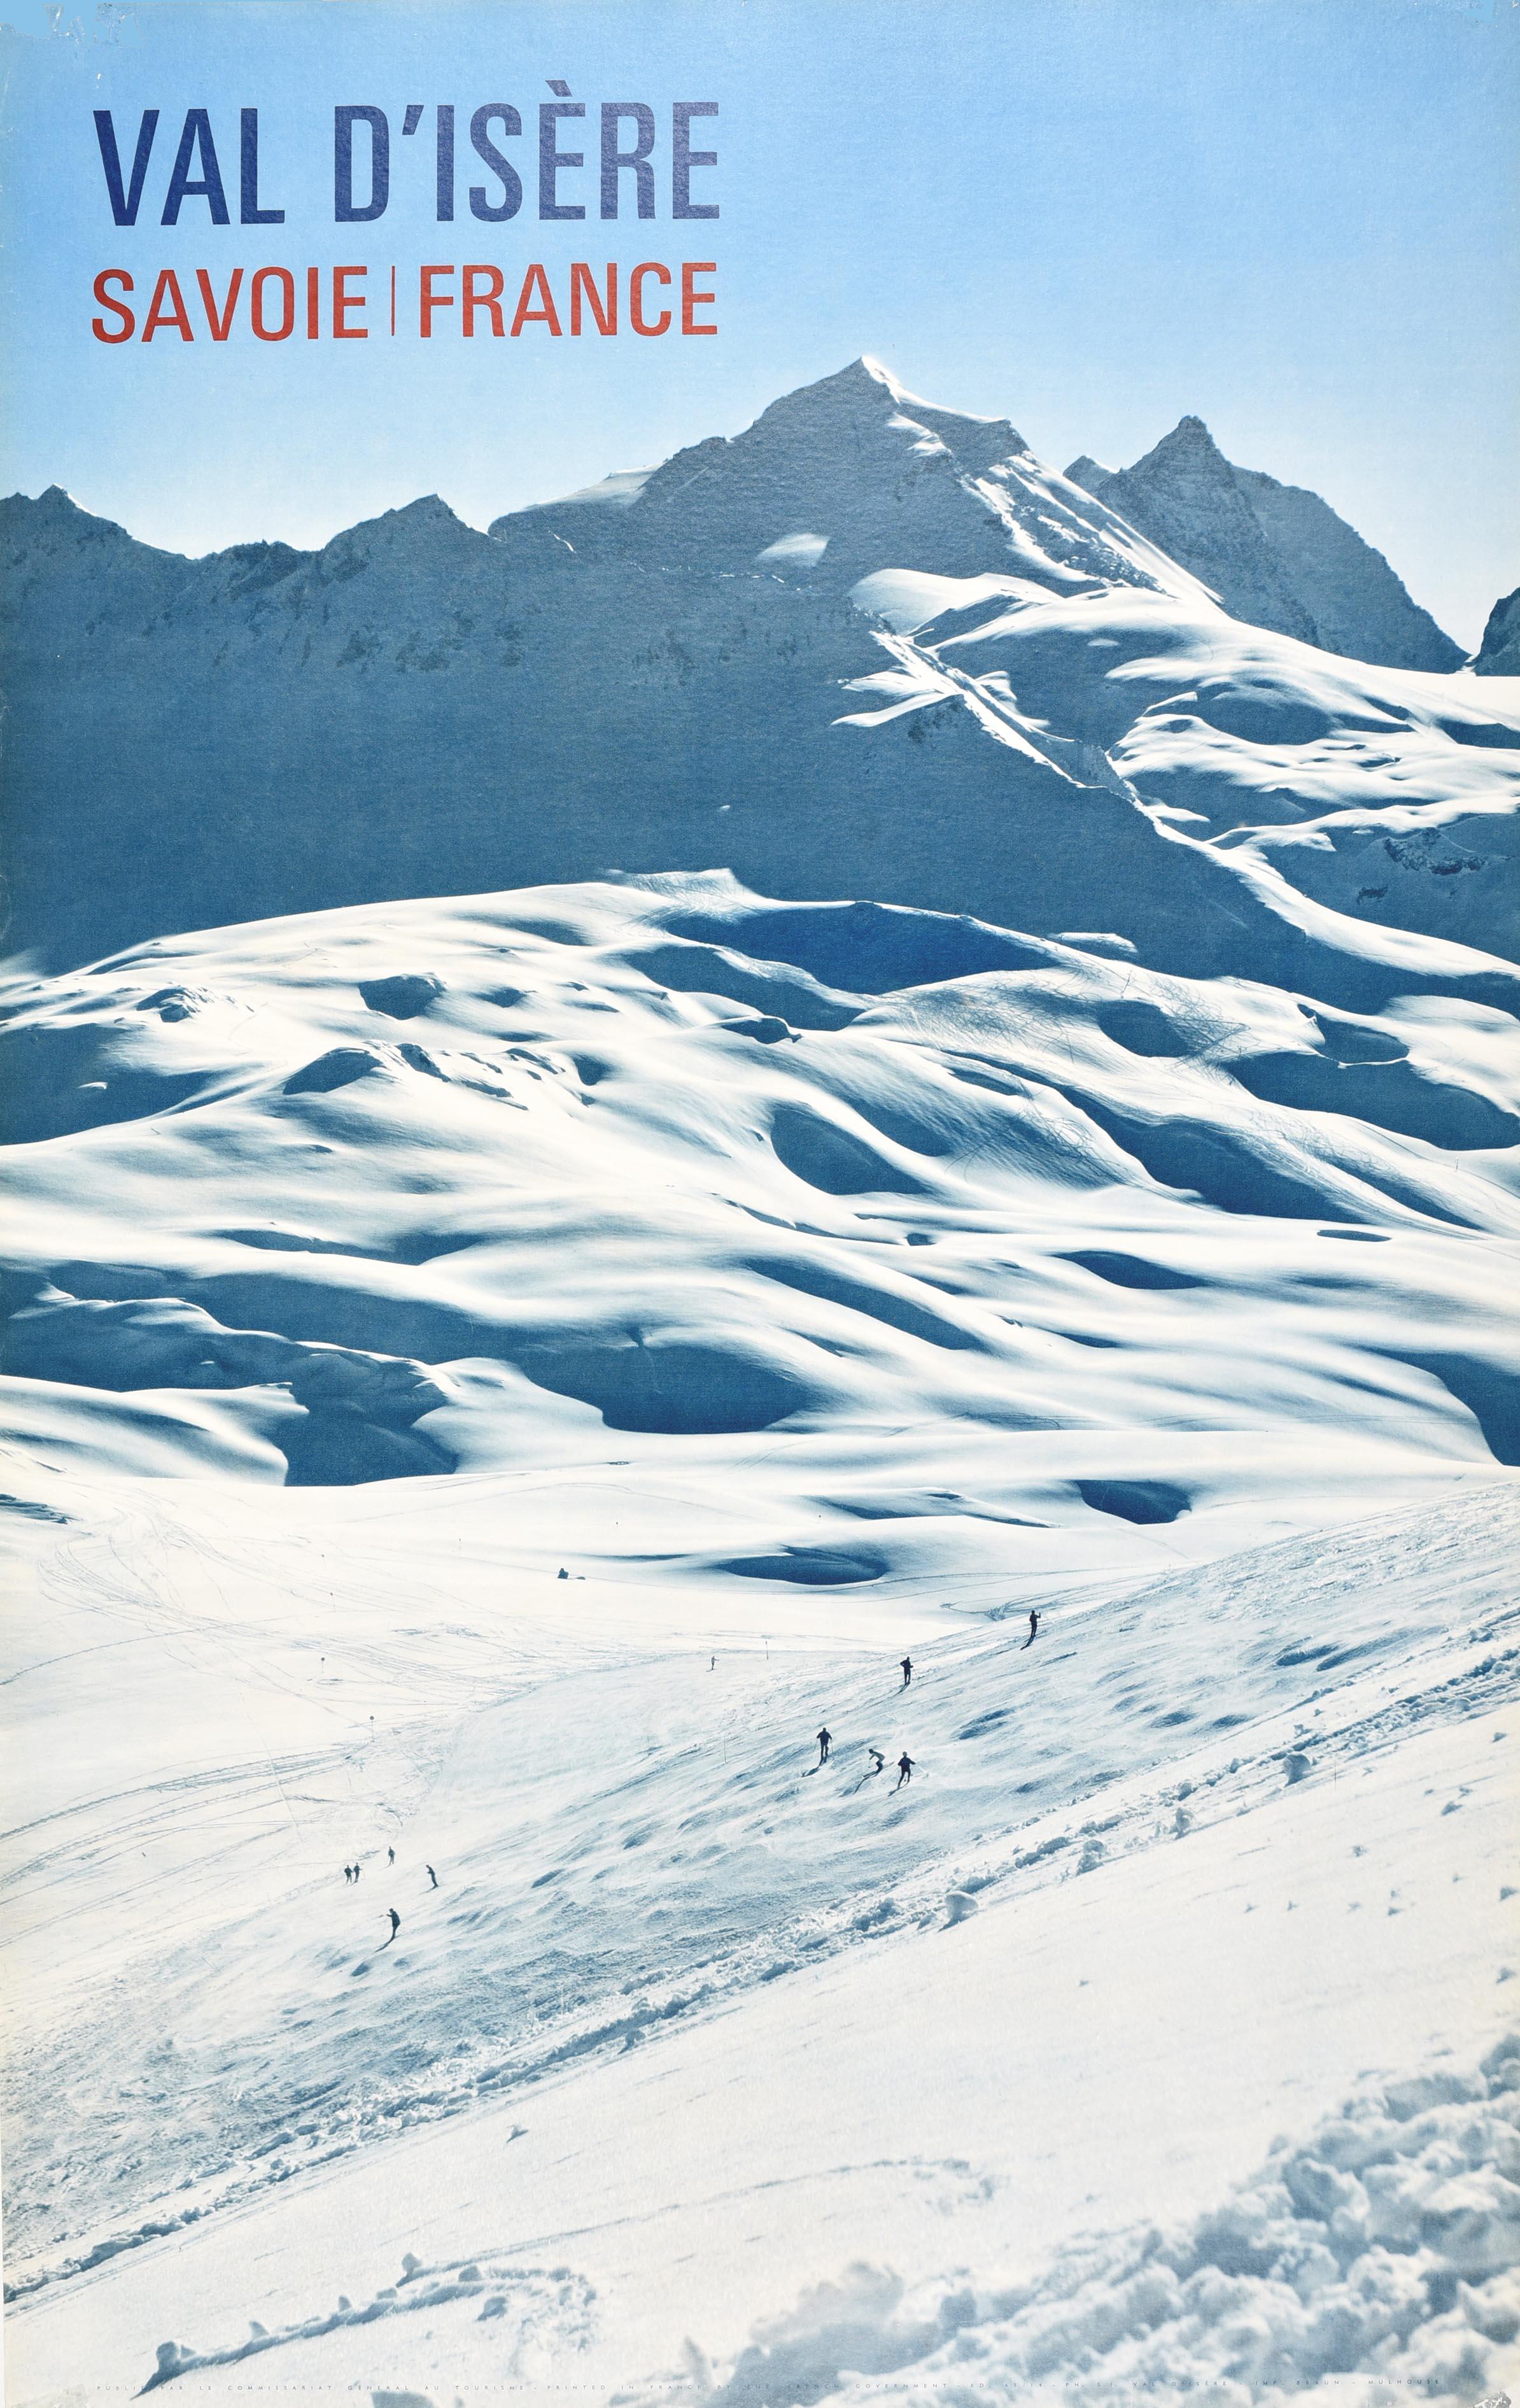 Unknown Print - Original Vintage Poster For Val D'Isere Savoie France Winter Sport Skiing Travel